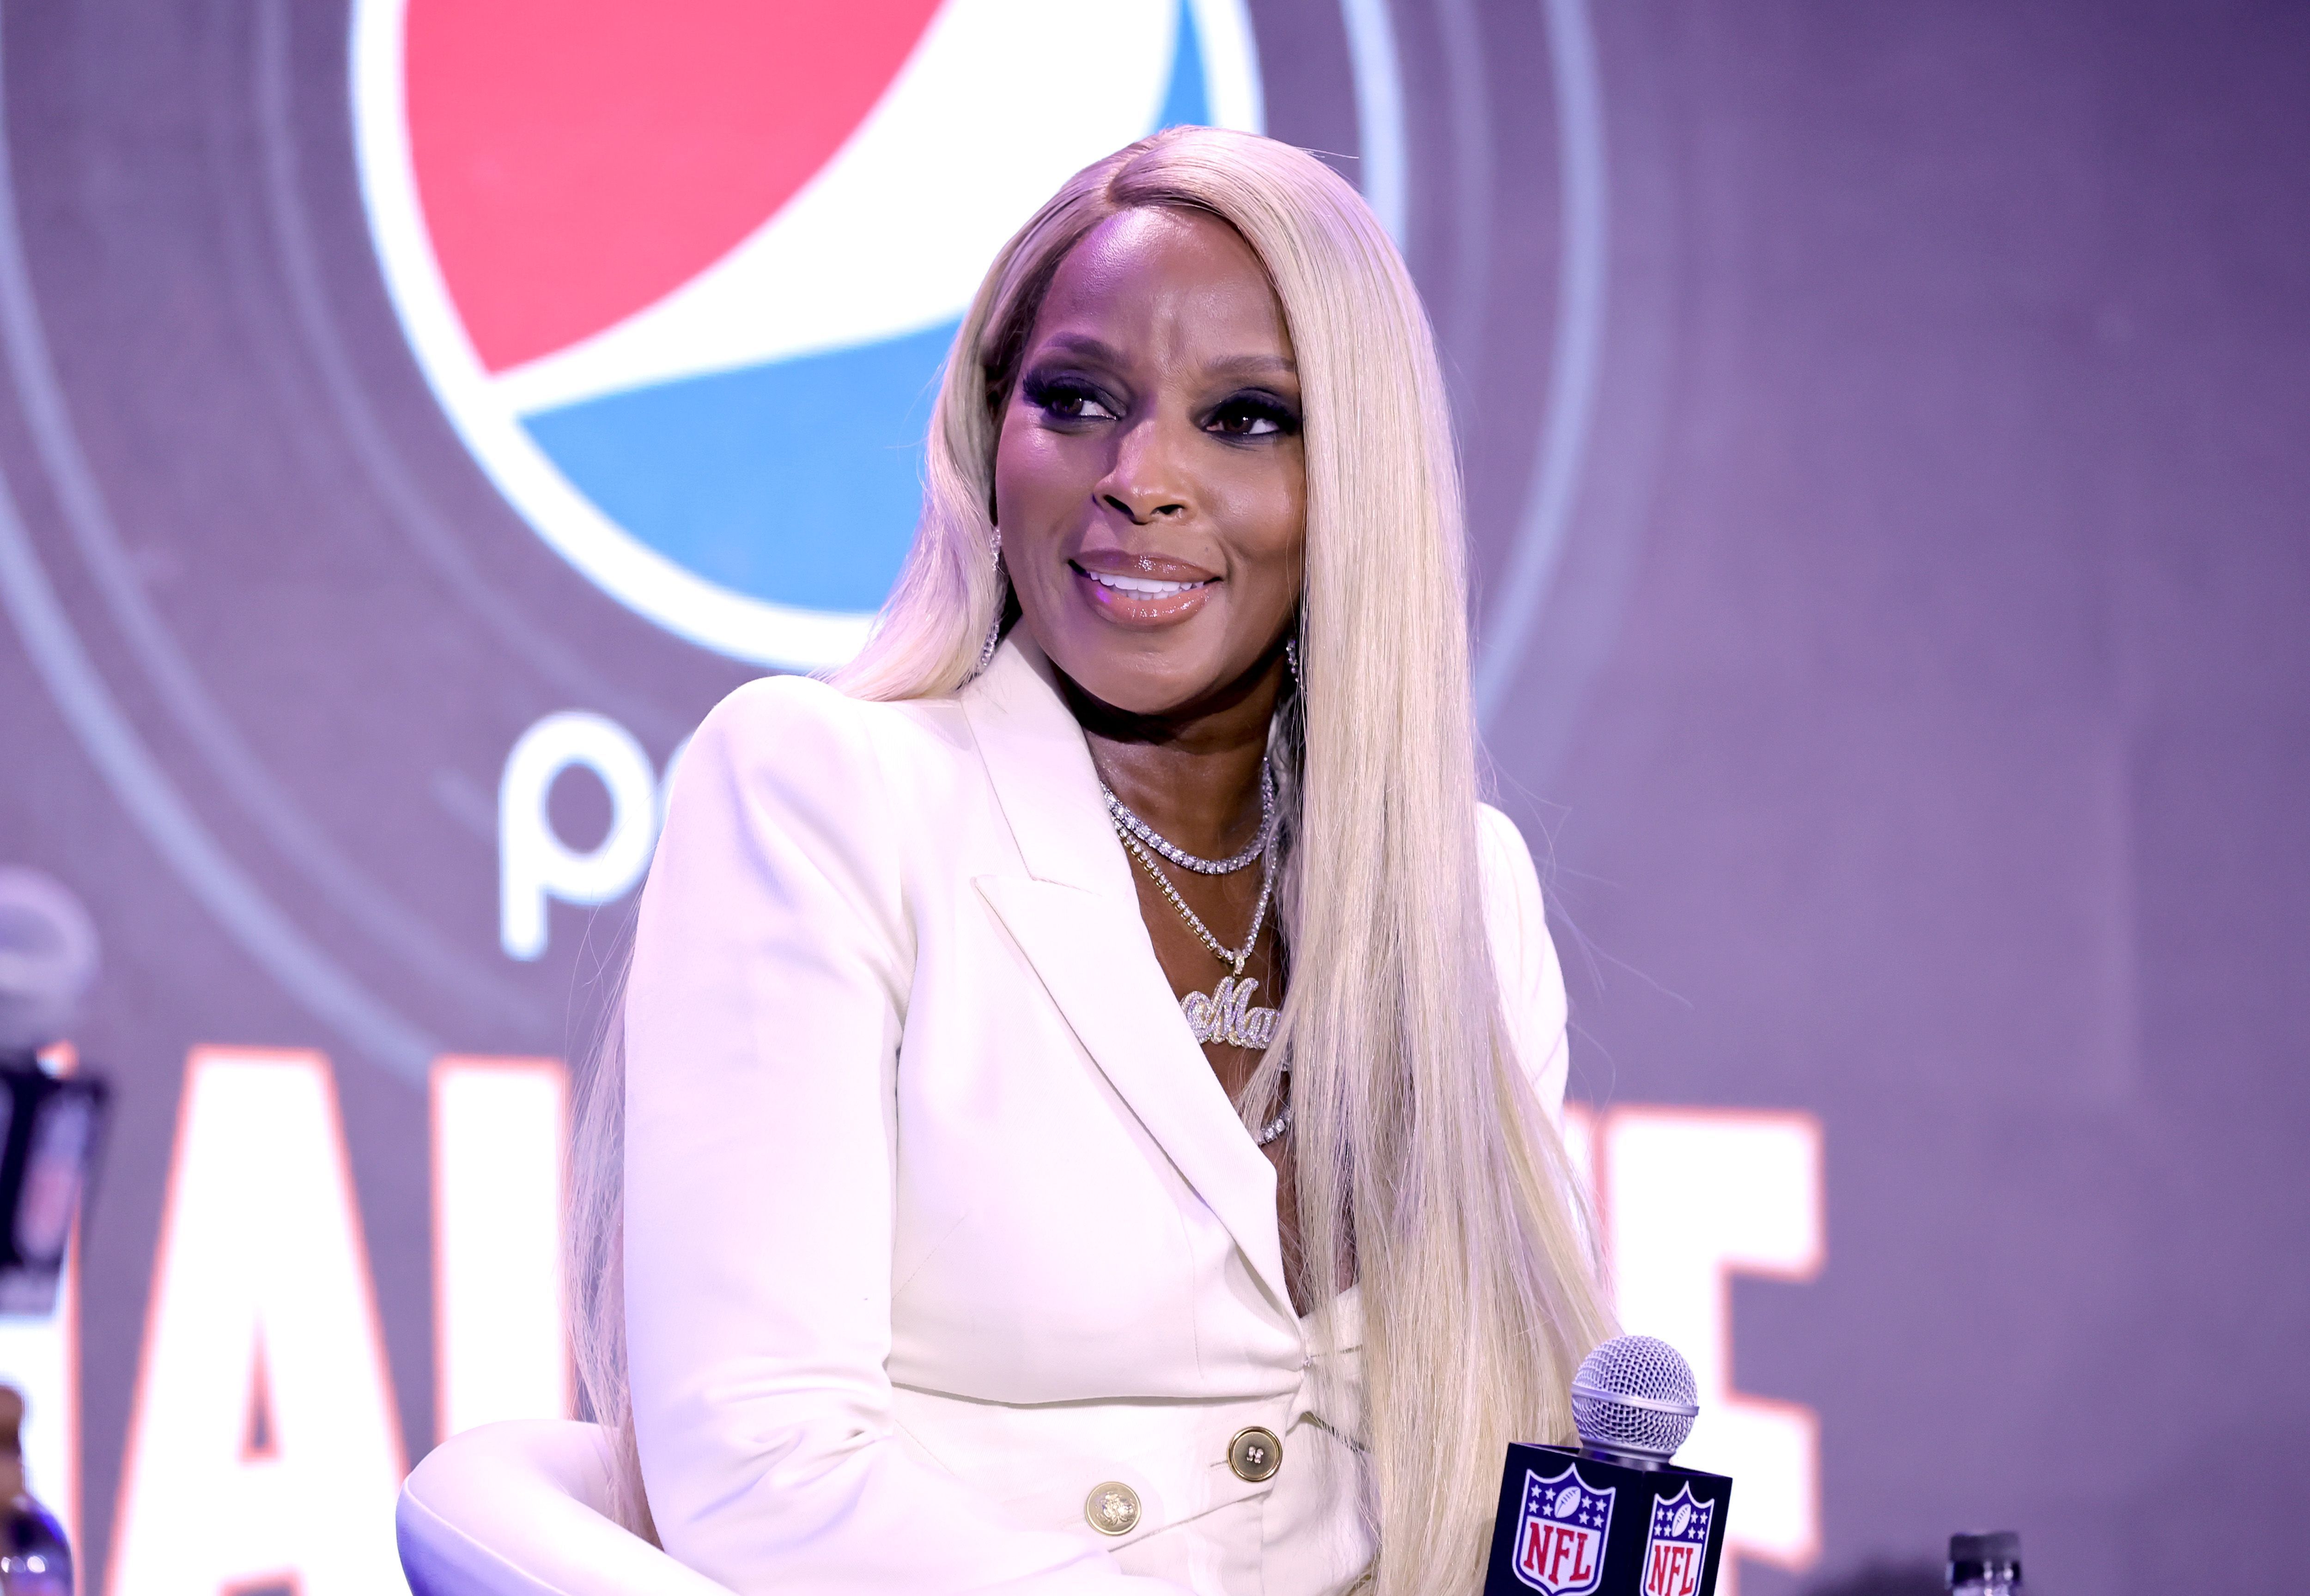 Mary J. Blige Calls Upcoming Super Bowl Performance An "Opportunity Of A Lifetime" While Discussing The Unpaid Gig